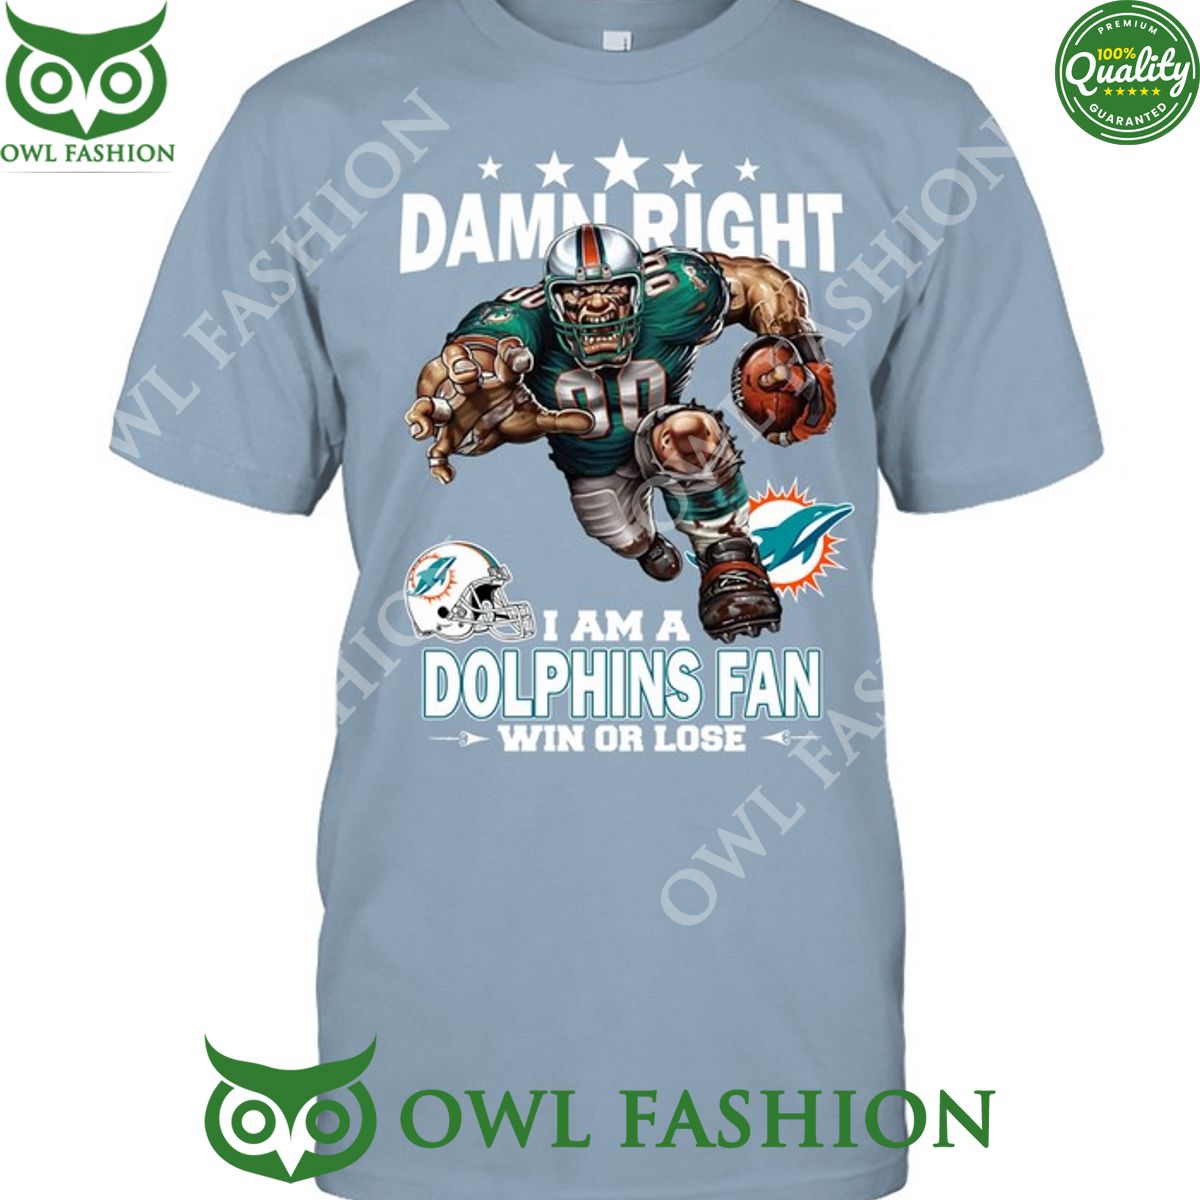 damn right miami dolphins nfl fan win or lose t shirt 1 G6s09.jpg